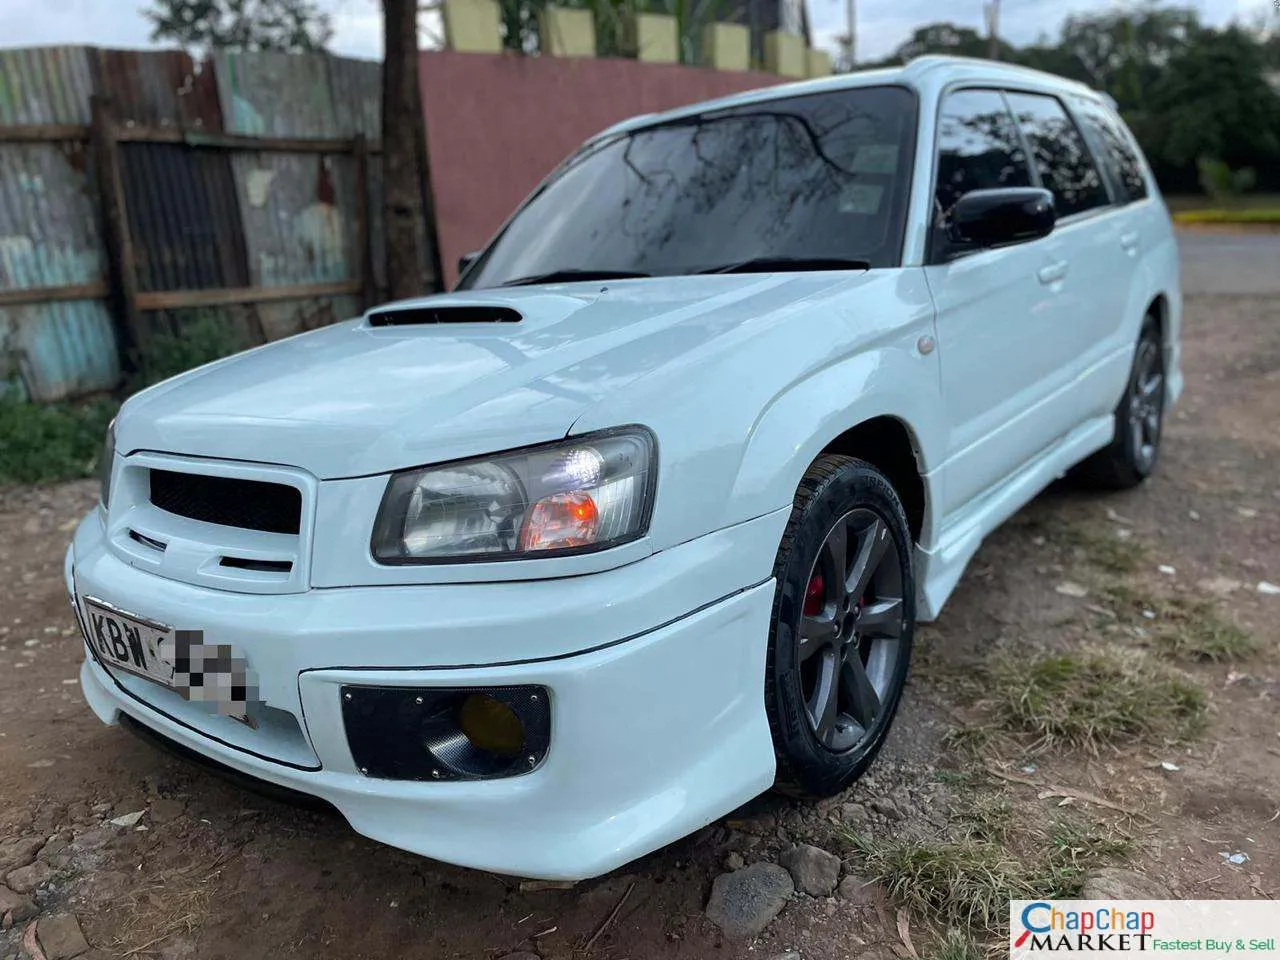 Subaru Forester Kenya🔥 You Pay 30% deposit Trade in Ok Forester for sale in kenya hire purchase installments EXCLUSIVE Turbo charged